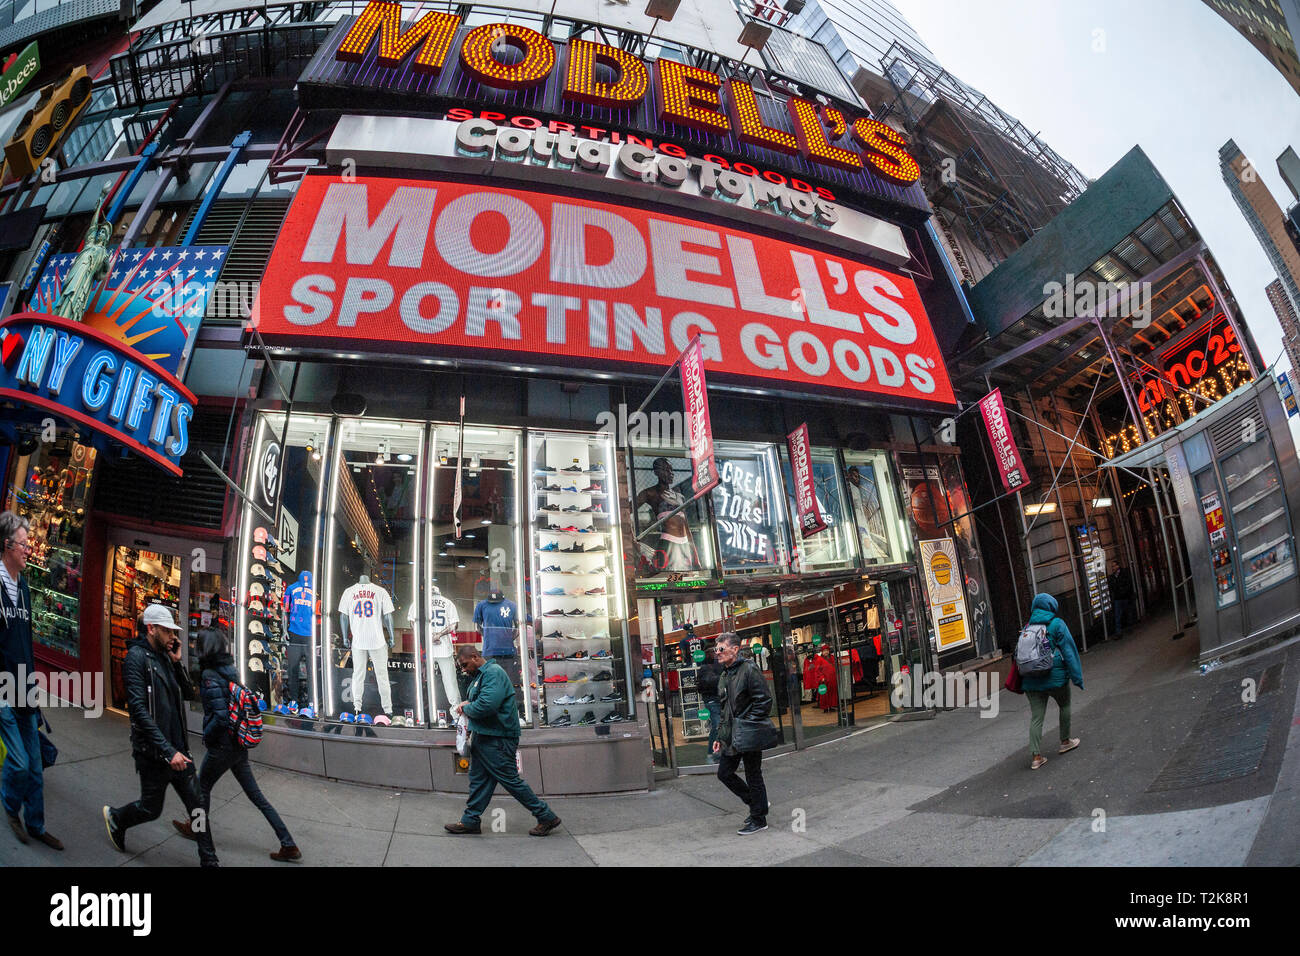 The Times Square Location Of The Family Owned Sporting Goods Chain Modells Is Seen In New York On Friday March 29 2019 Facing Pressure From Online And Big Box Retailers Modells Sporting Goods Is Reported To Have Hired An Adviser On Restructuring And A Possible Bankruptcy Richard B Levine T2K8R1 